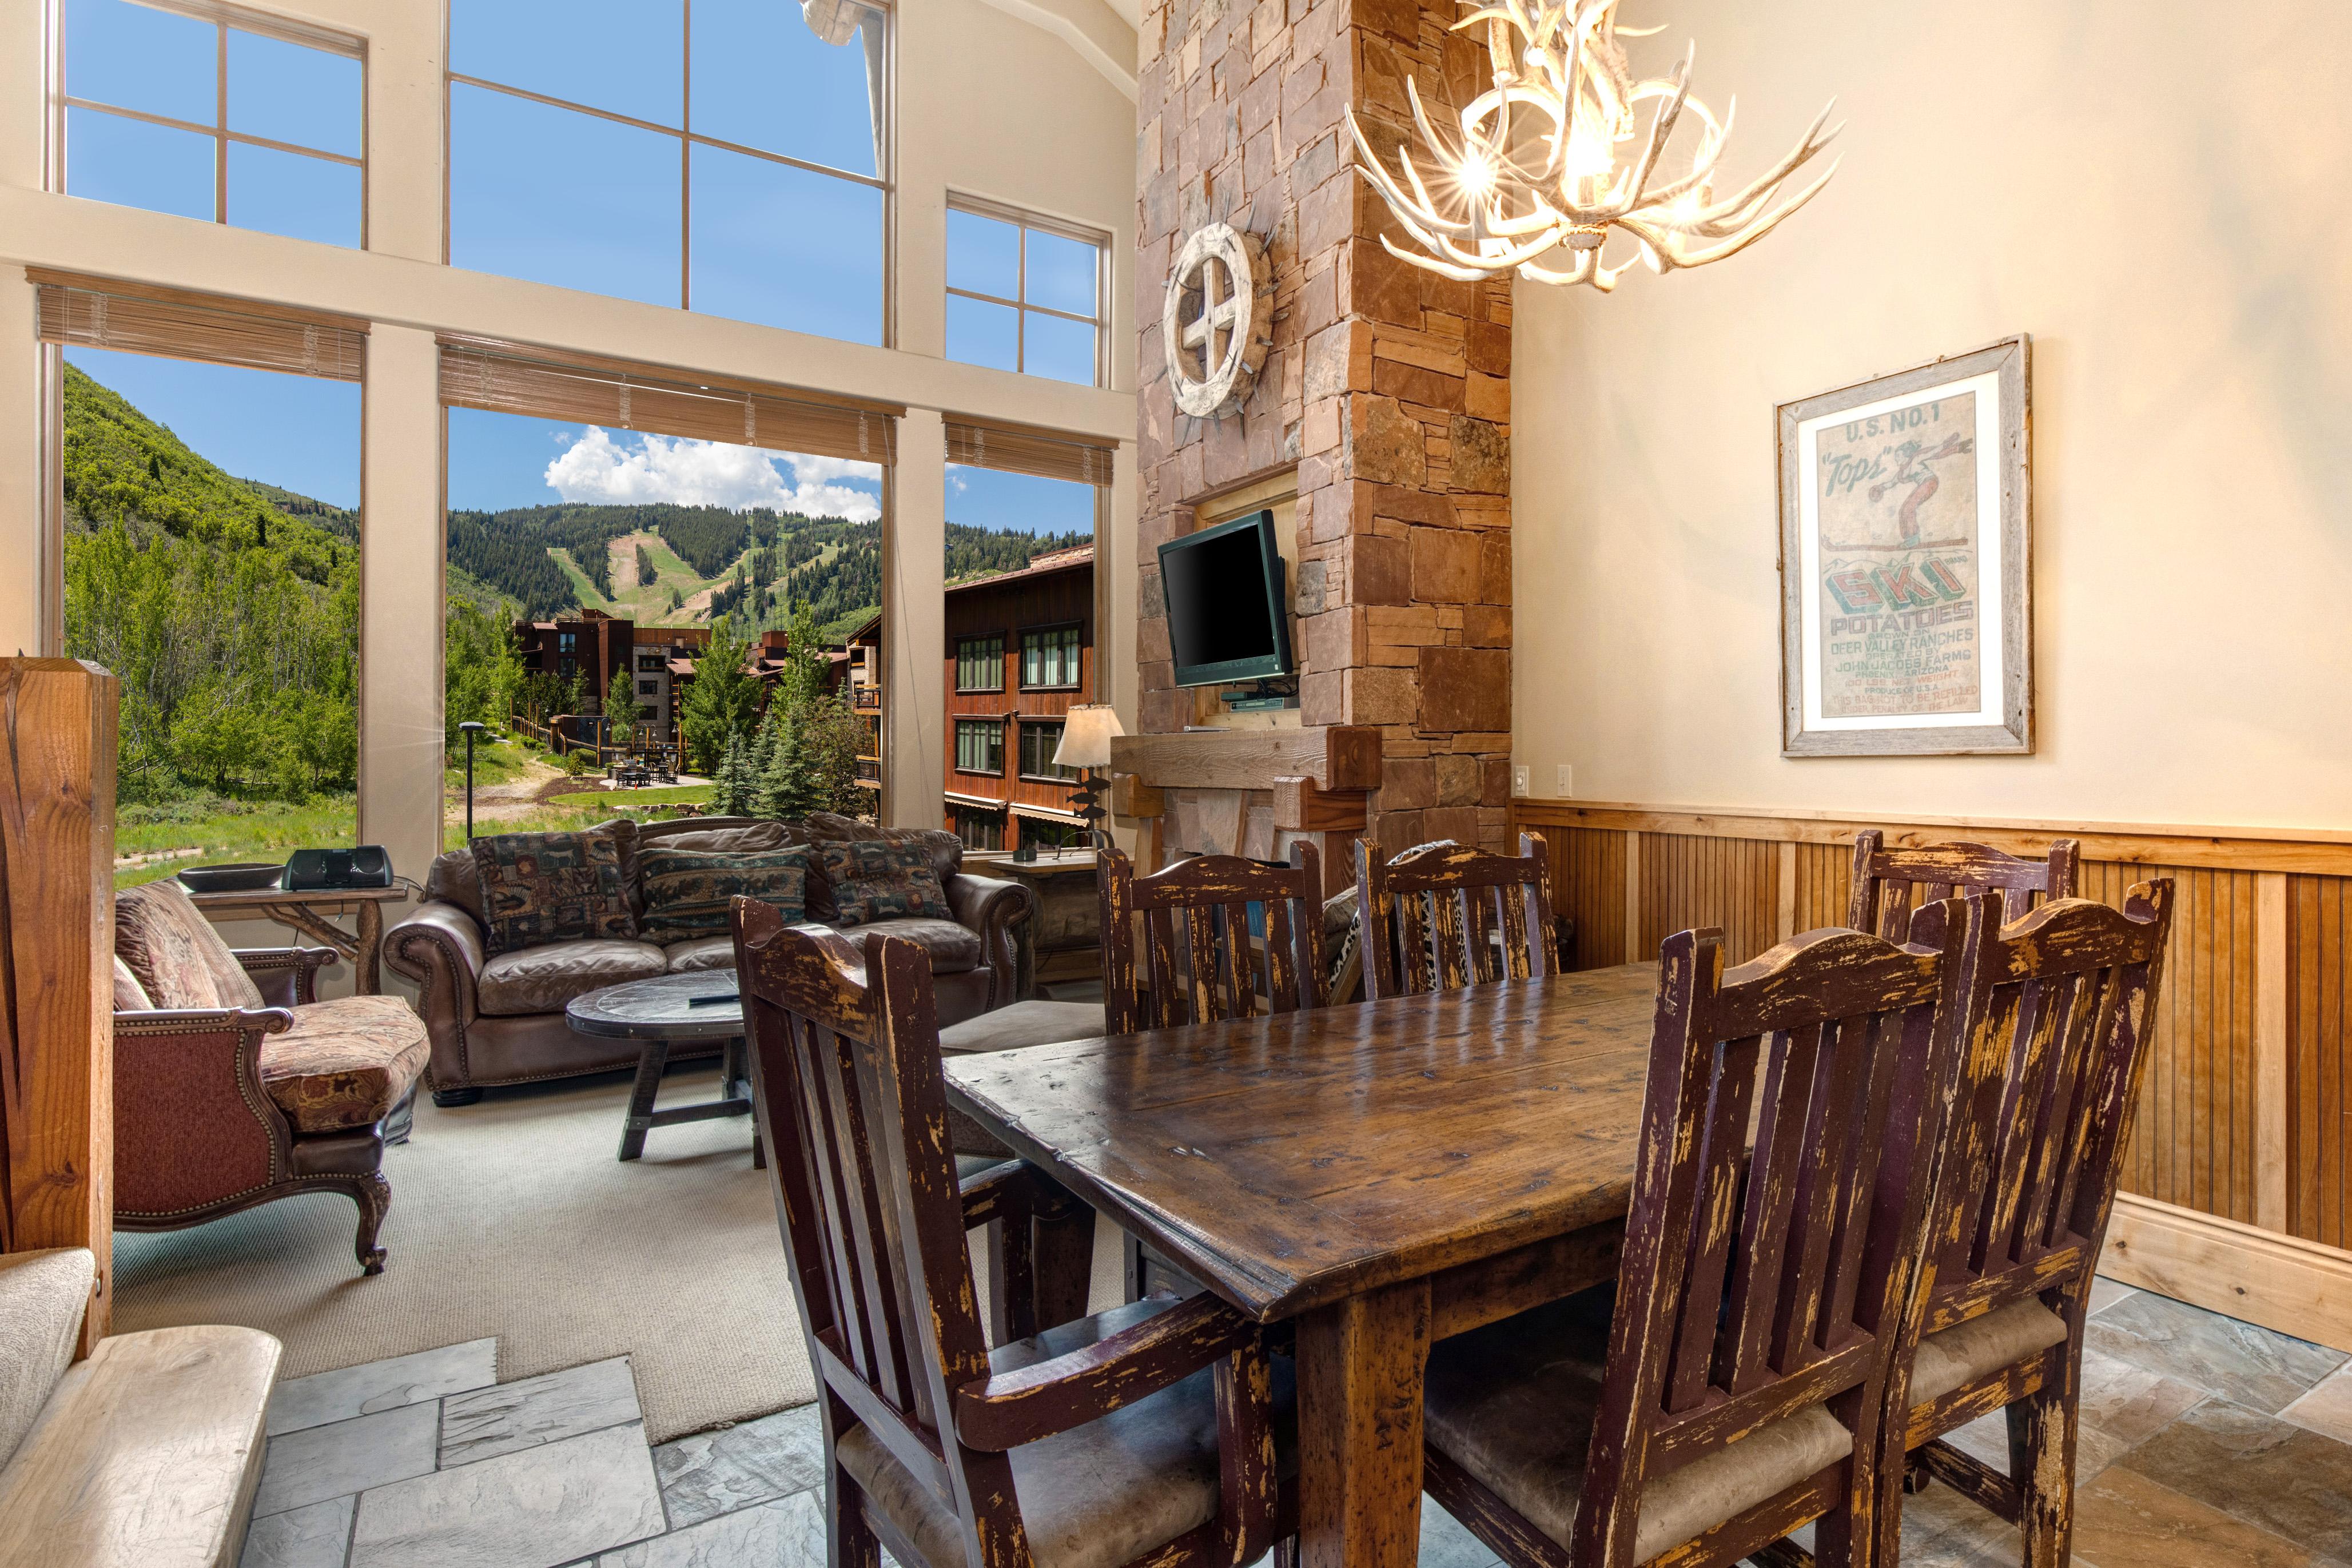 Property Image 2 - The Lodges at Deer Valley-A - #5323